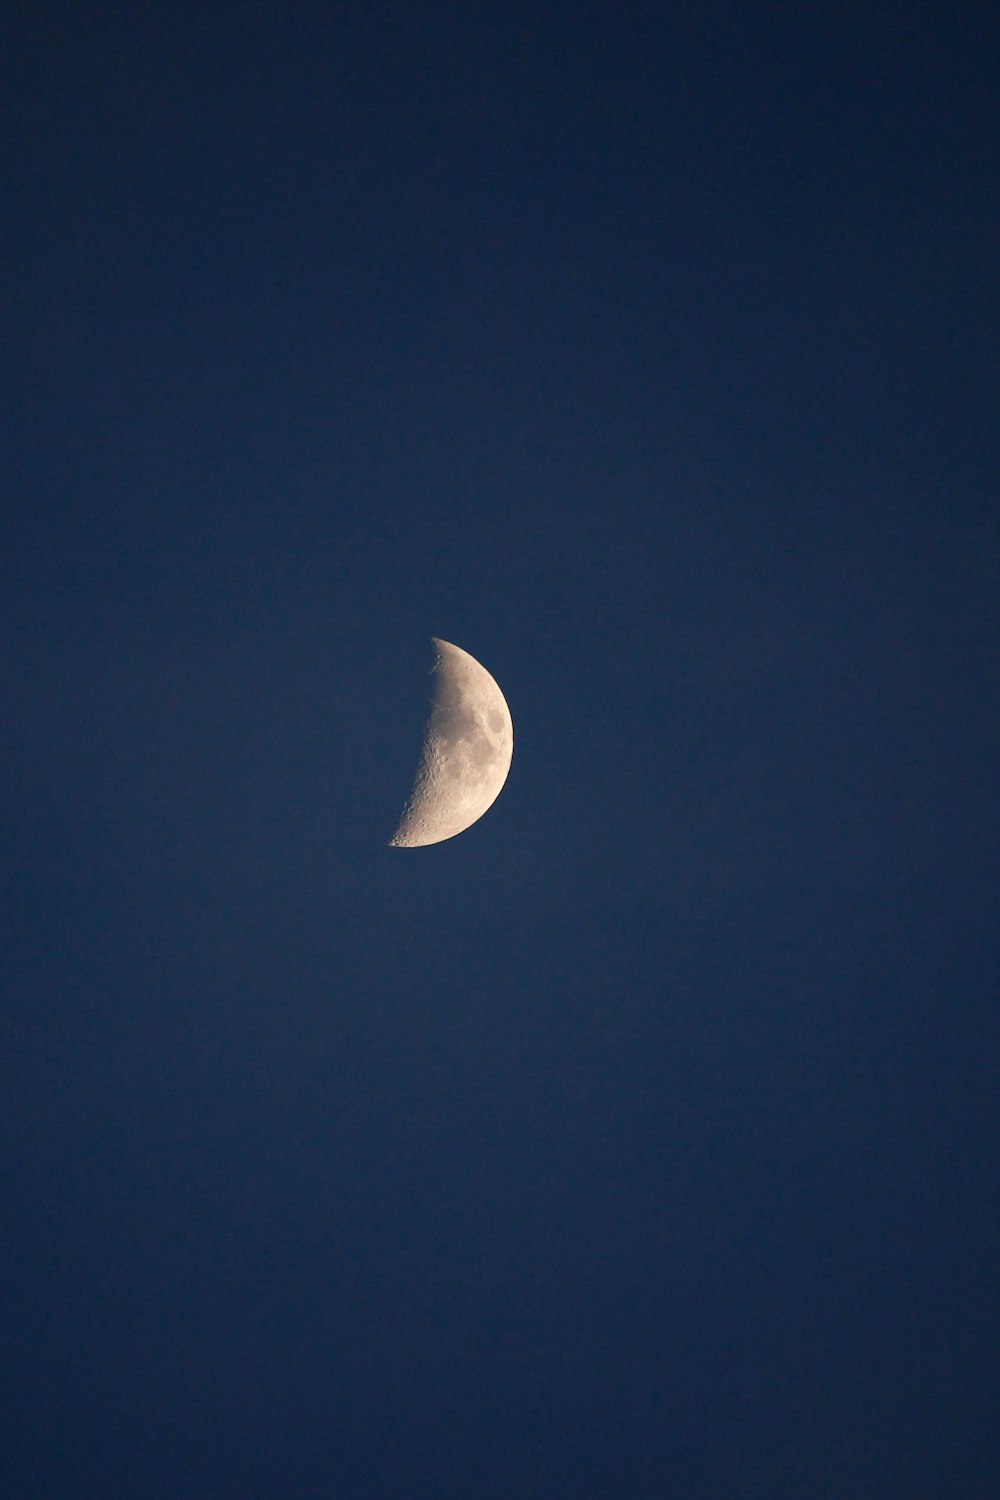 100+ Half Moon Pictures | Download Free Images on Unsplash